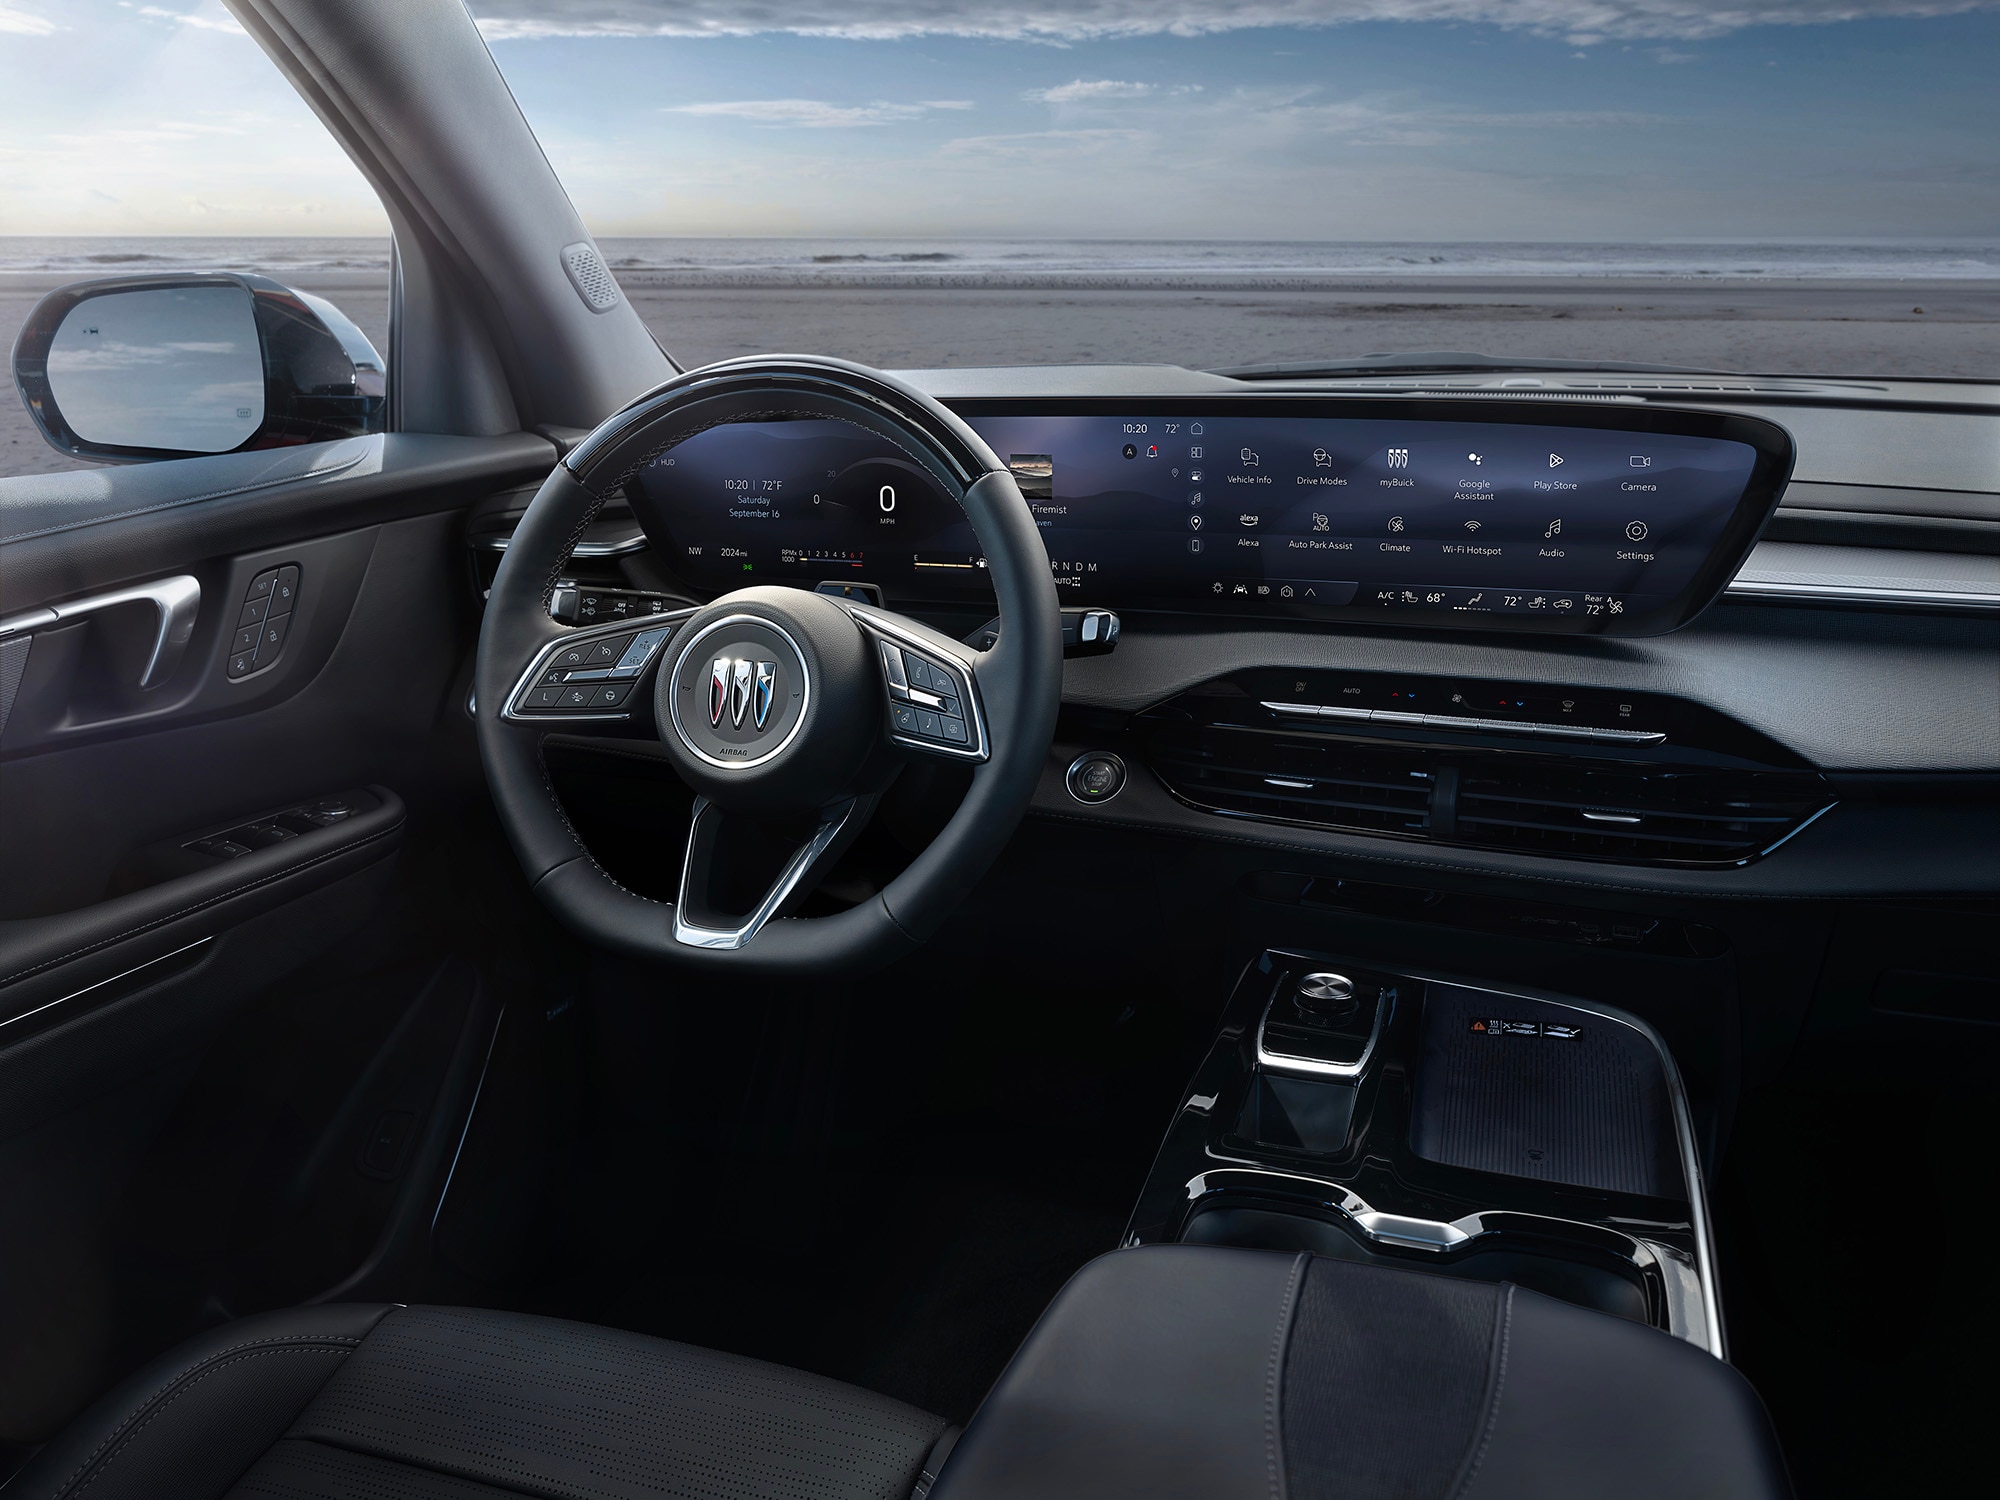 2025 Buick Enclave Sport Touring interior in black from the driver's seat